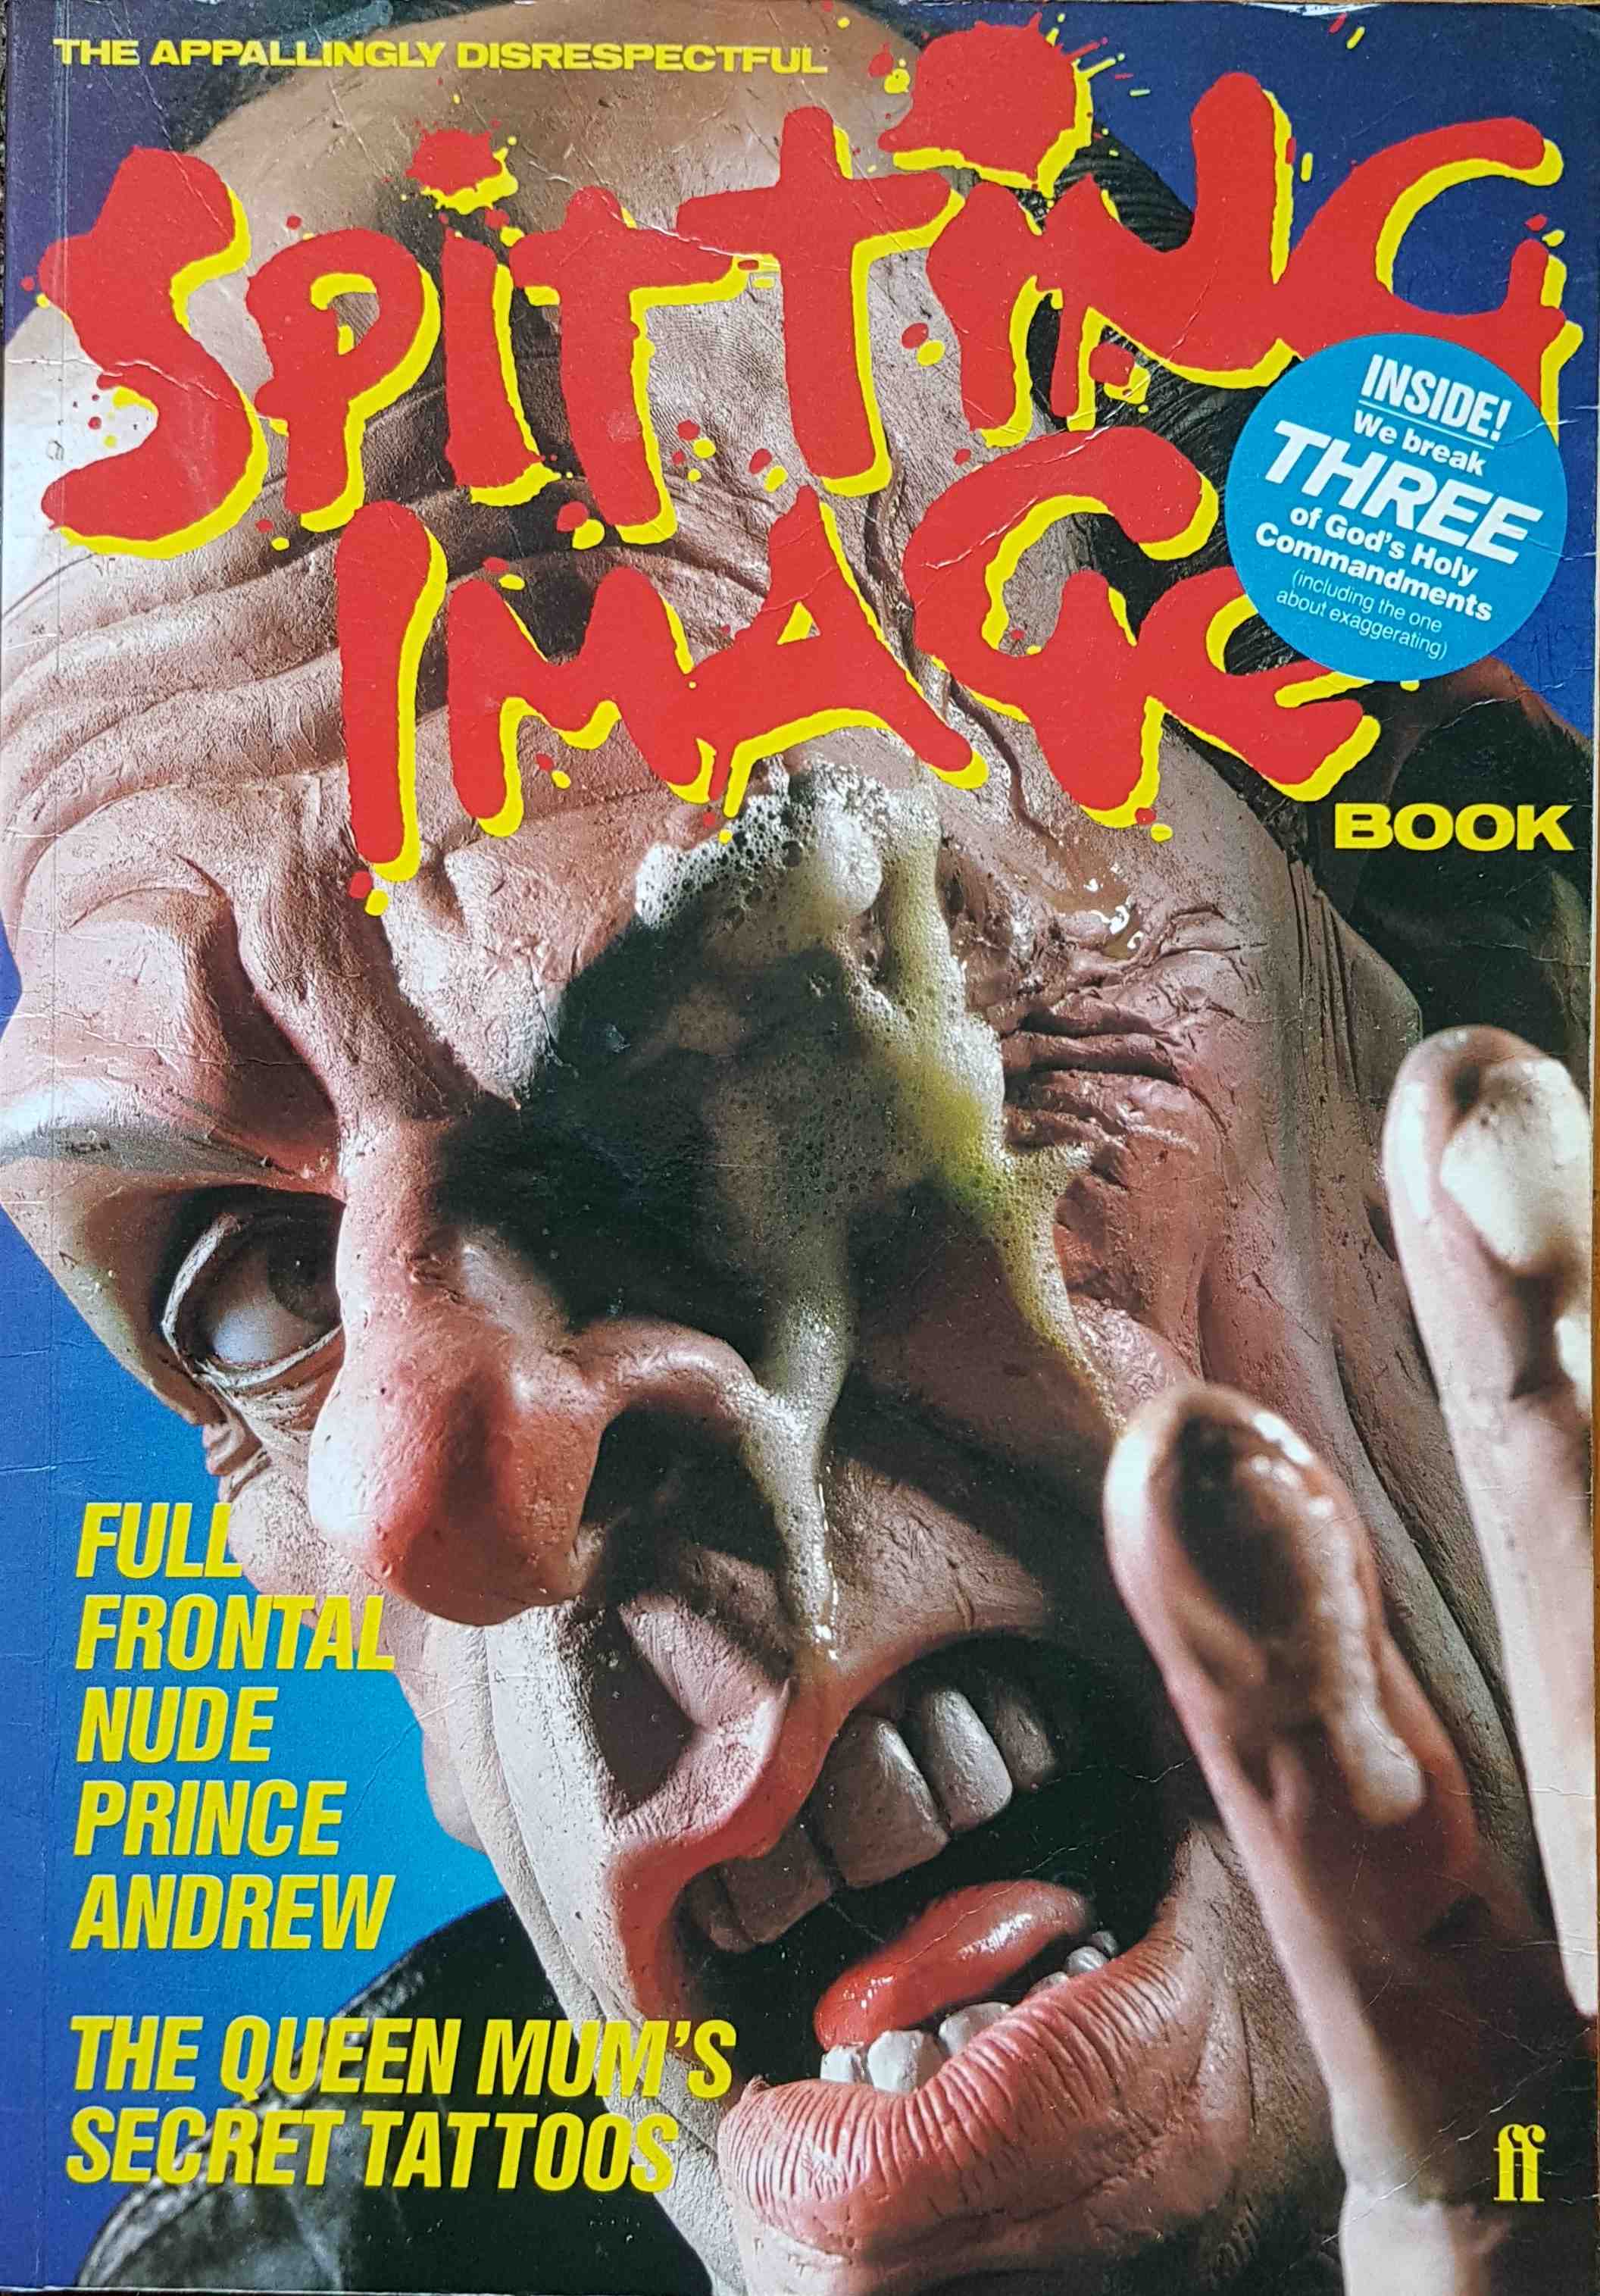 Picture of 0-571-13670-2 Spitting image book by artist Various from ITV, Channel 4 and Channel 5 books library